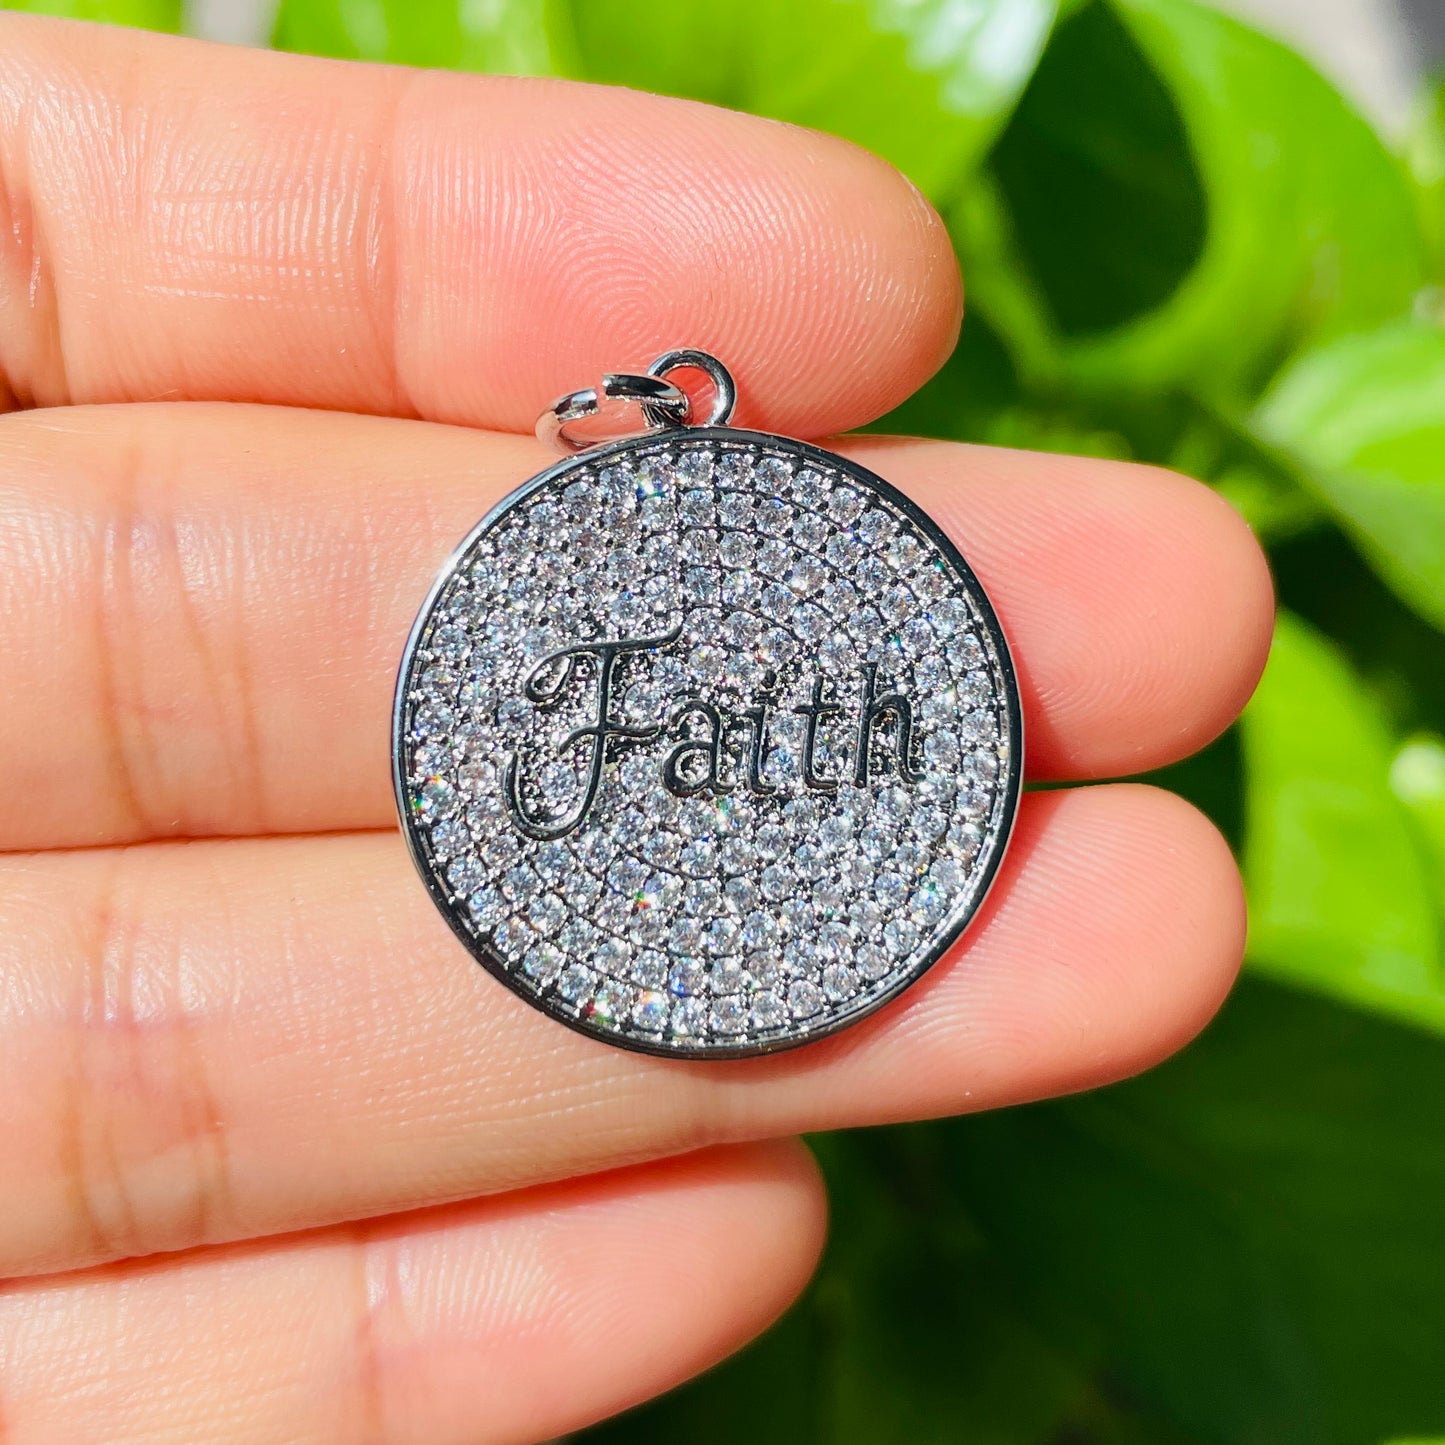 10pcs/lot 25mm CZ Pave Round Plate FAITH Quote Charms Silver CZ Paved Charms Christian Quotes Discs On Sale Charms Beads Beyond